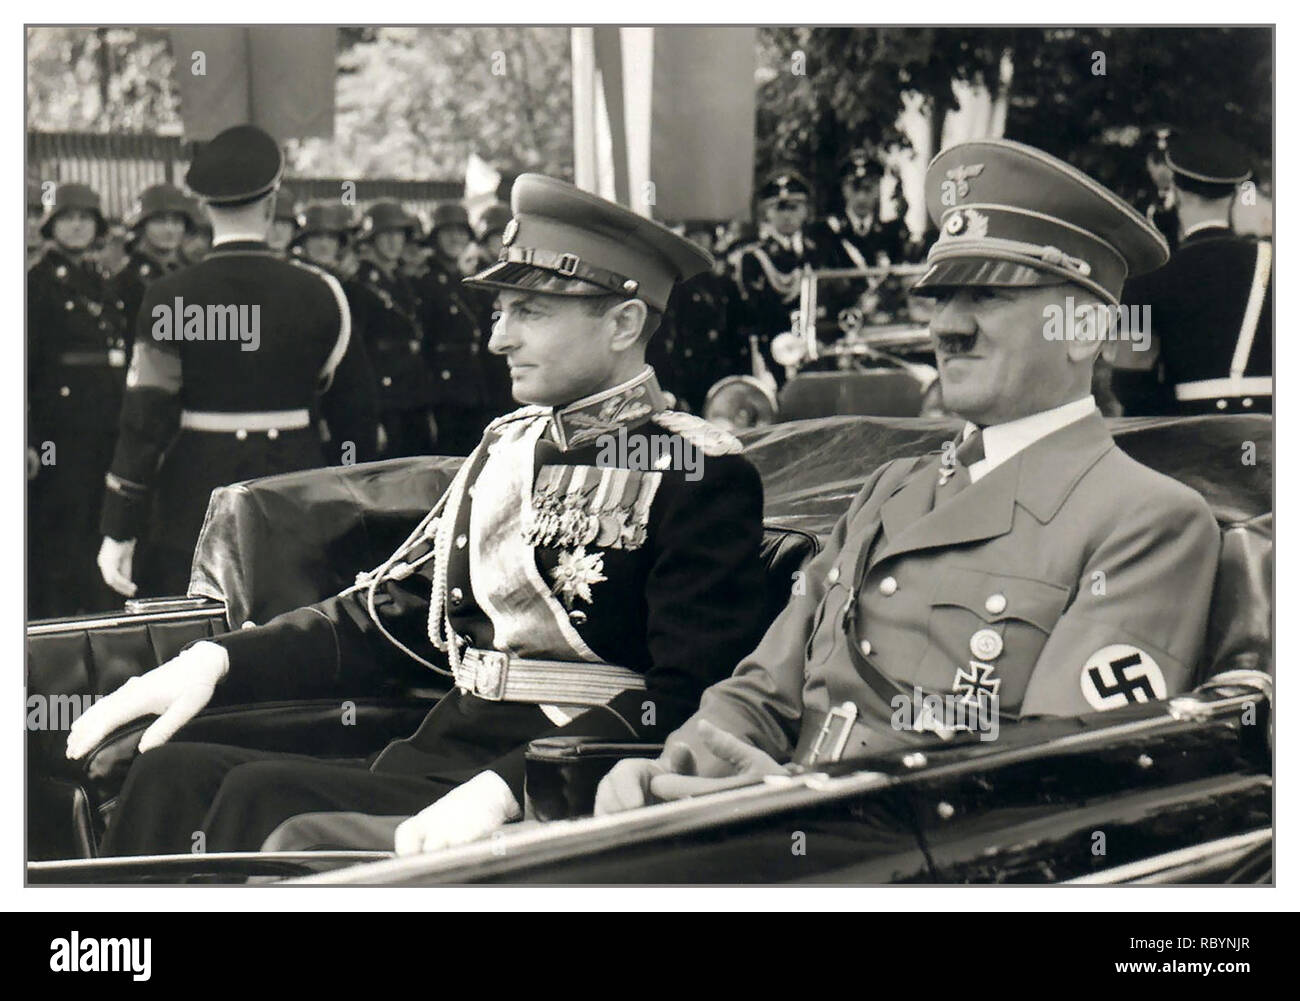 Adolf Hitler, the Fuhrer of Germany, and Pavle Karađorđević, Prince Regent of Yugoslavia, met in Berchtesgaden on March 5, 1941.  On March 3, 1941, Yugoslav Prince-Regent Pavle Karađorđević secretly went to Nazi Germany to negotiate with Adolf Hitler about the accession of Yugoslavia to the Tripartite Pact. Stock Photo